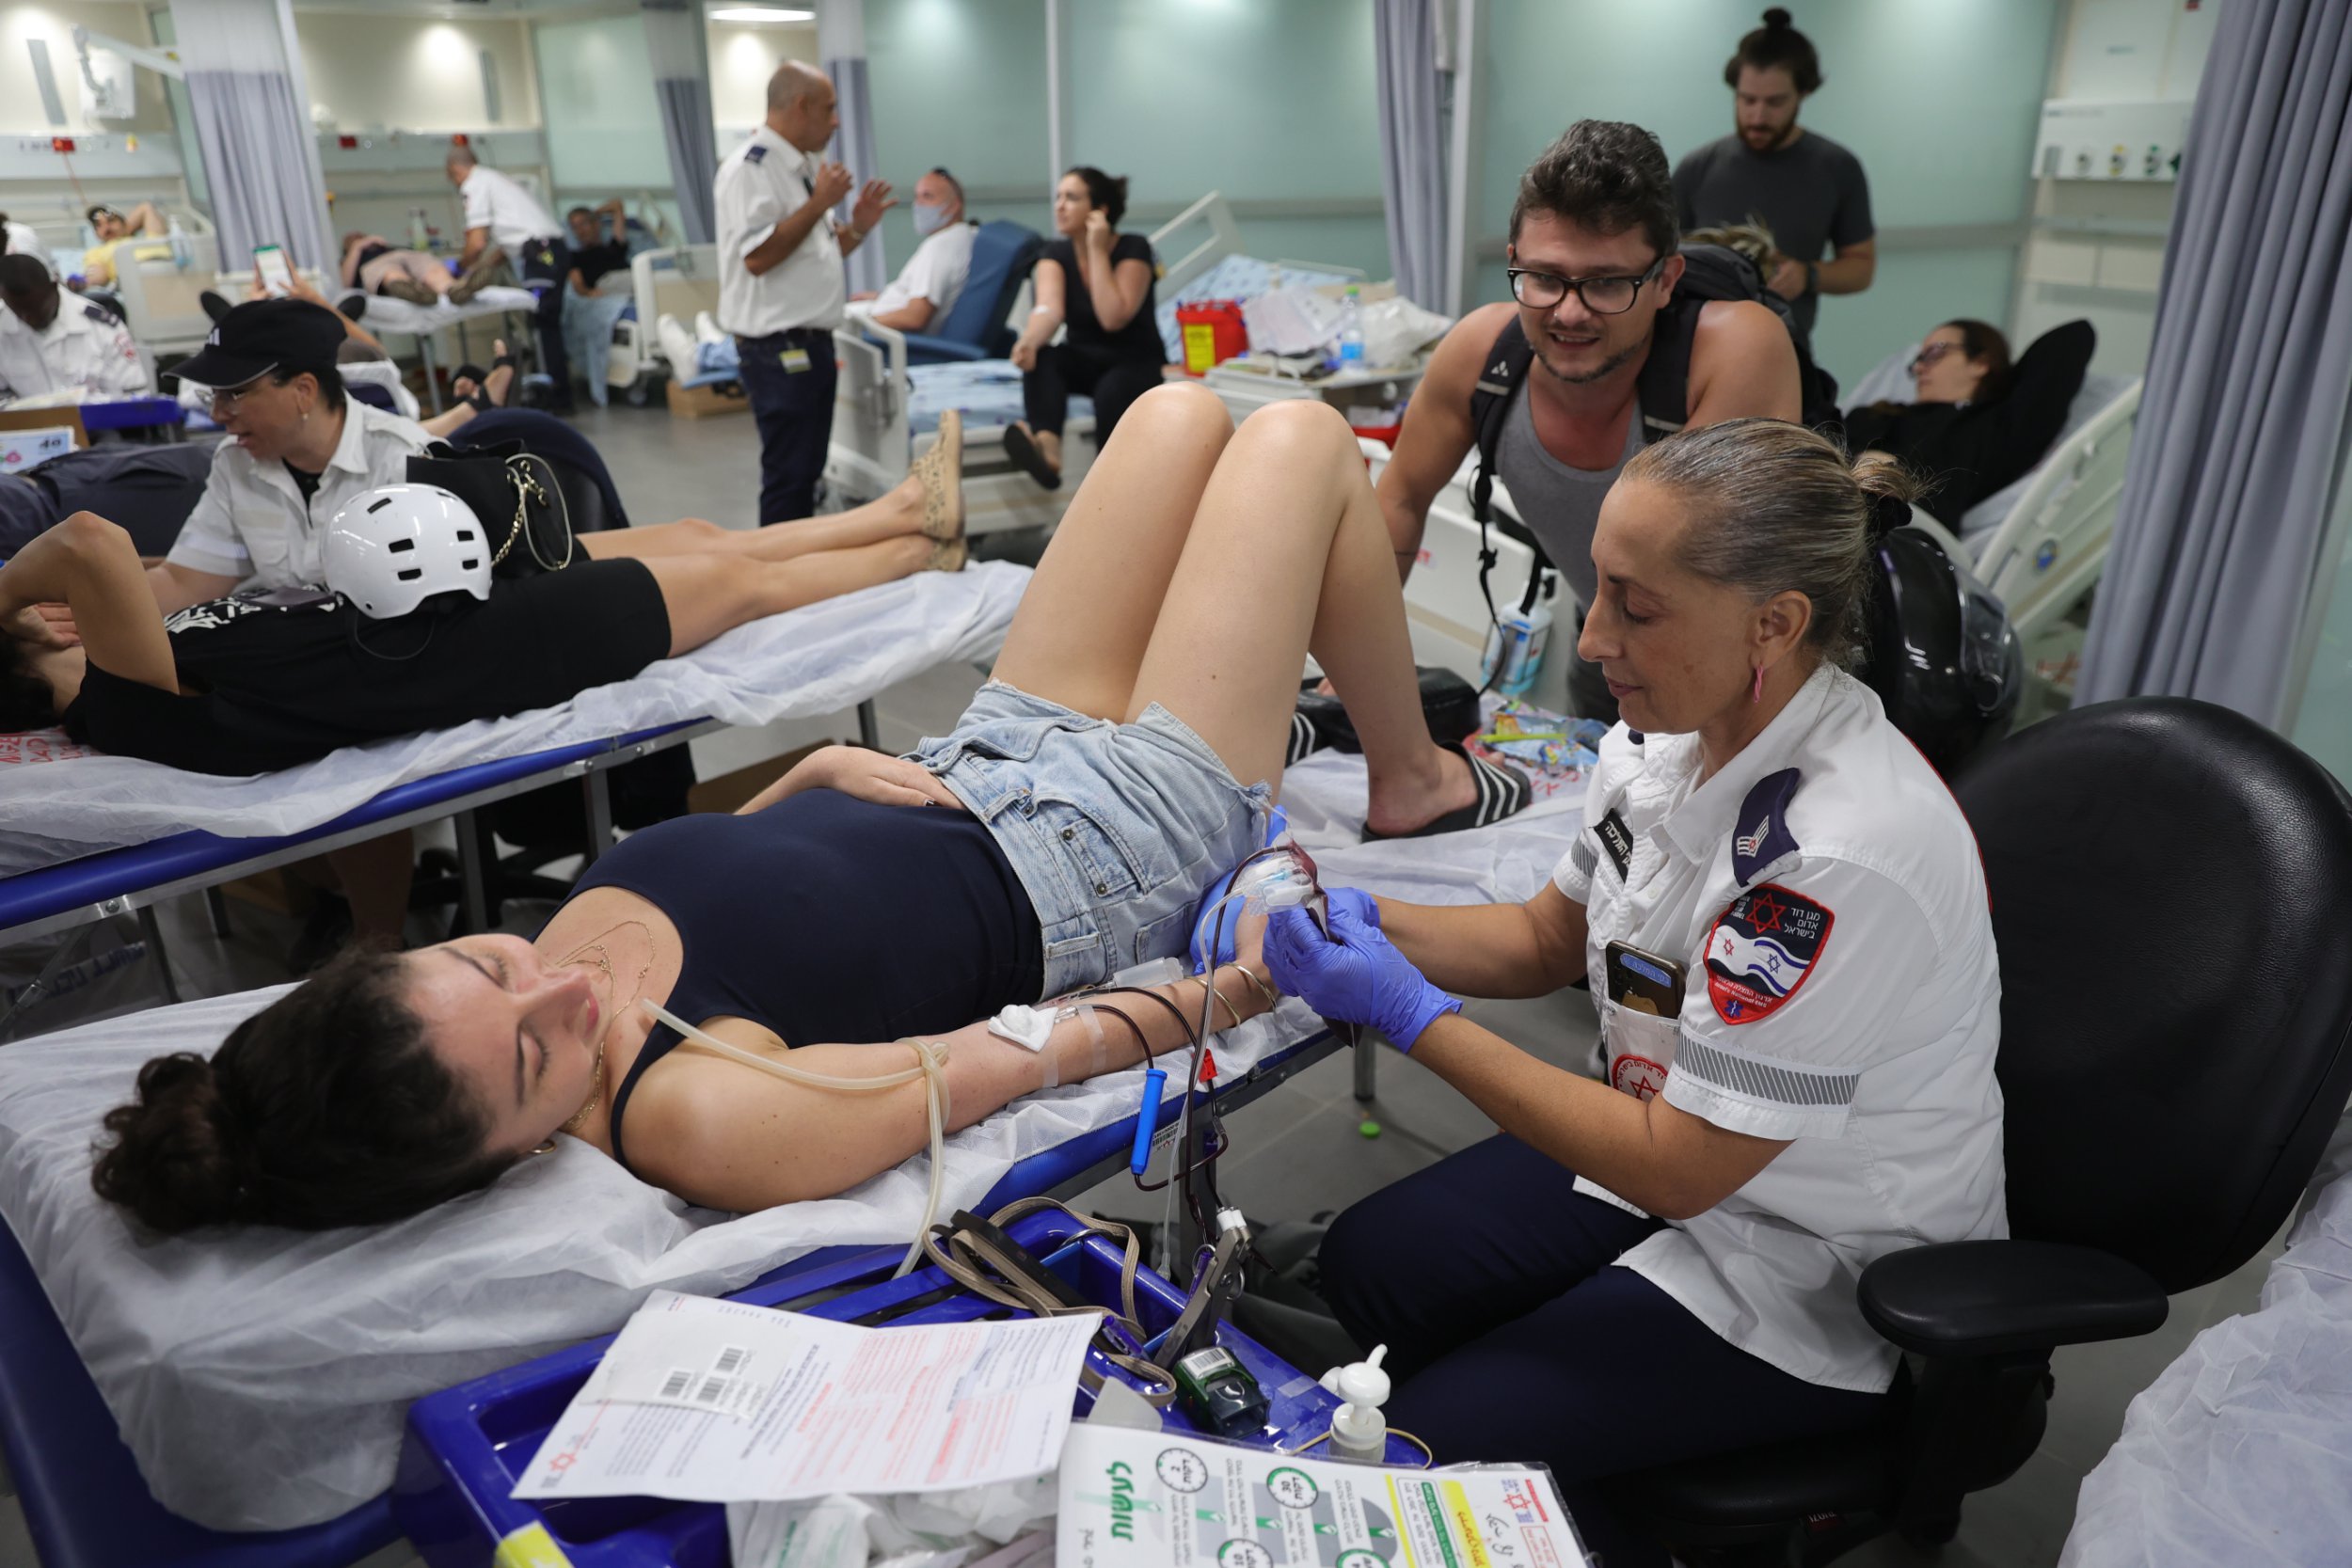 Numerous volunteers waited at Israeli hospitals for their turn to donate blood for victims